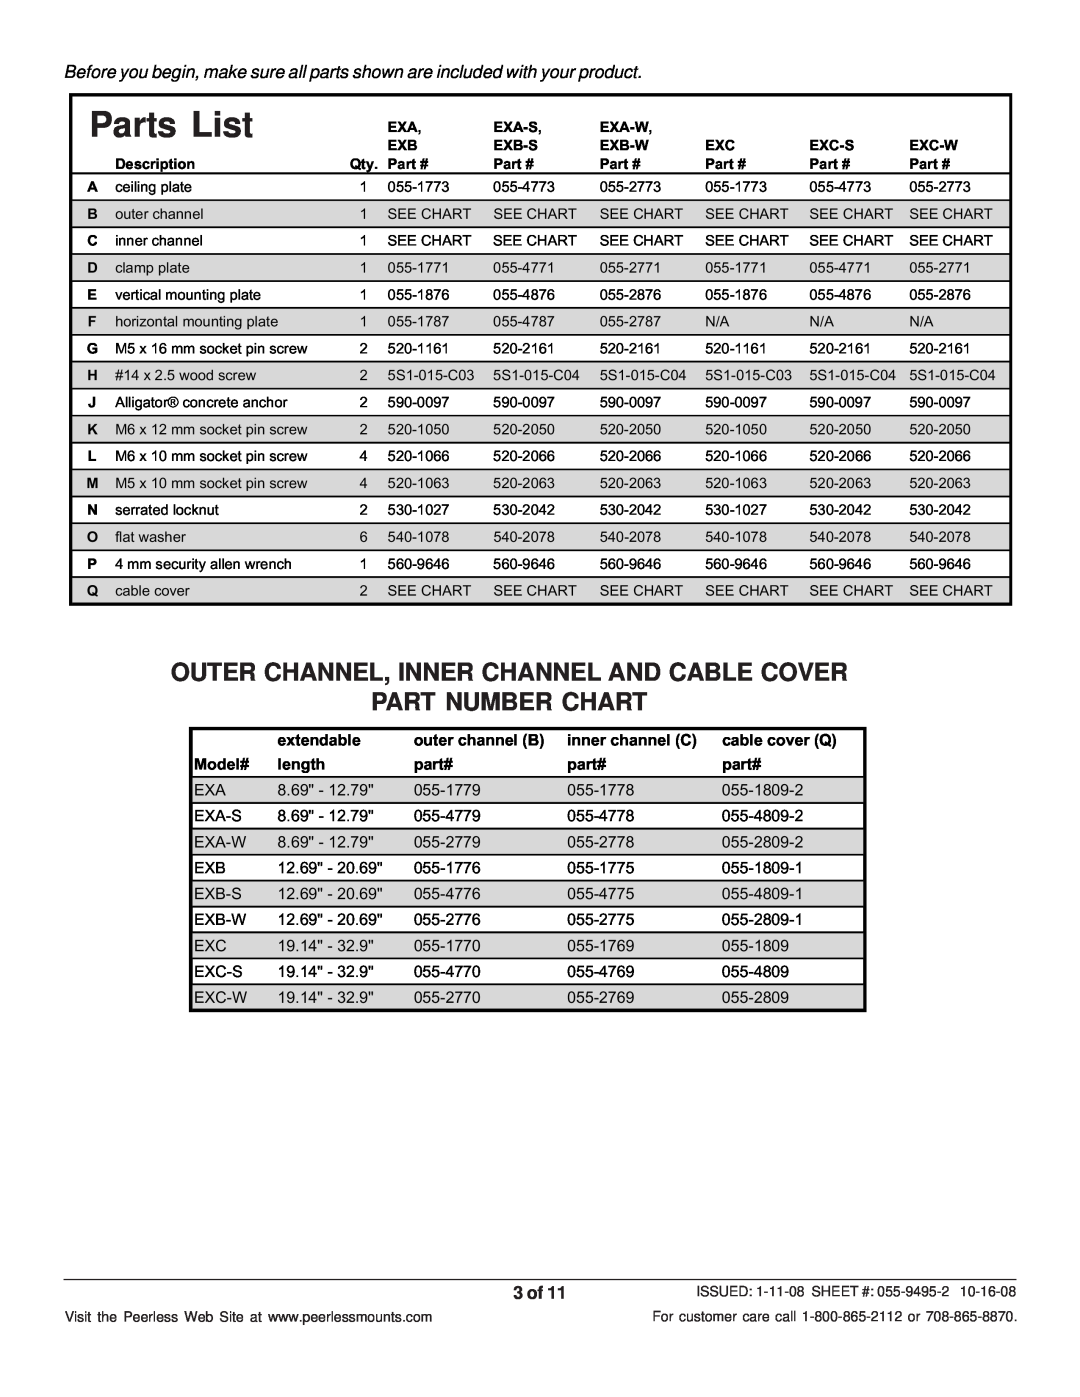 Peerless Industries EXA-W Outer Channel, Inner Channel And Cable Cover Part Number Chart, Parts List, extendable, Model# 